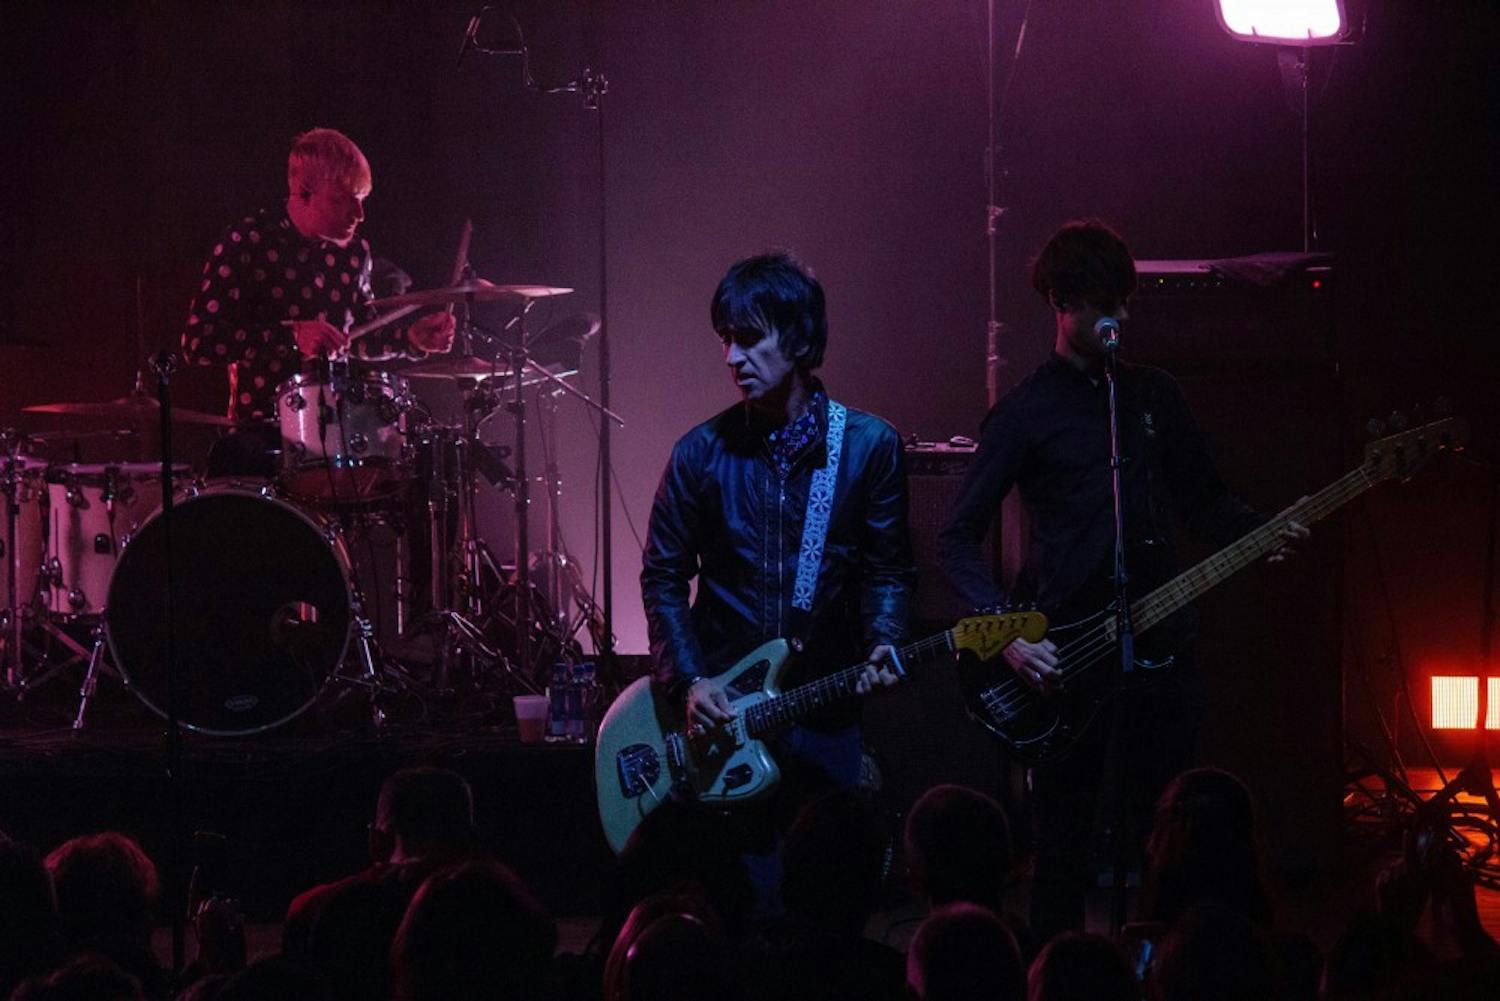 Johnny Marr held nothing back at the Town Ballroom on Saturday night. The legendary guitarist and Smiths founding member played both classic tracks like “The Headmaster’s Ritual” as well as newer cuts from “Call the Comet.”